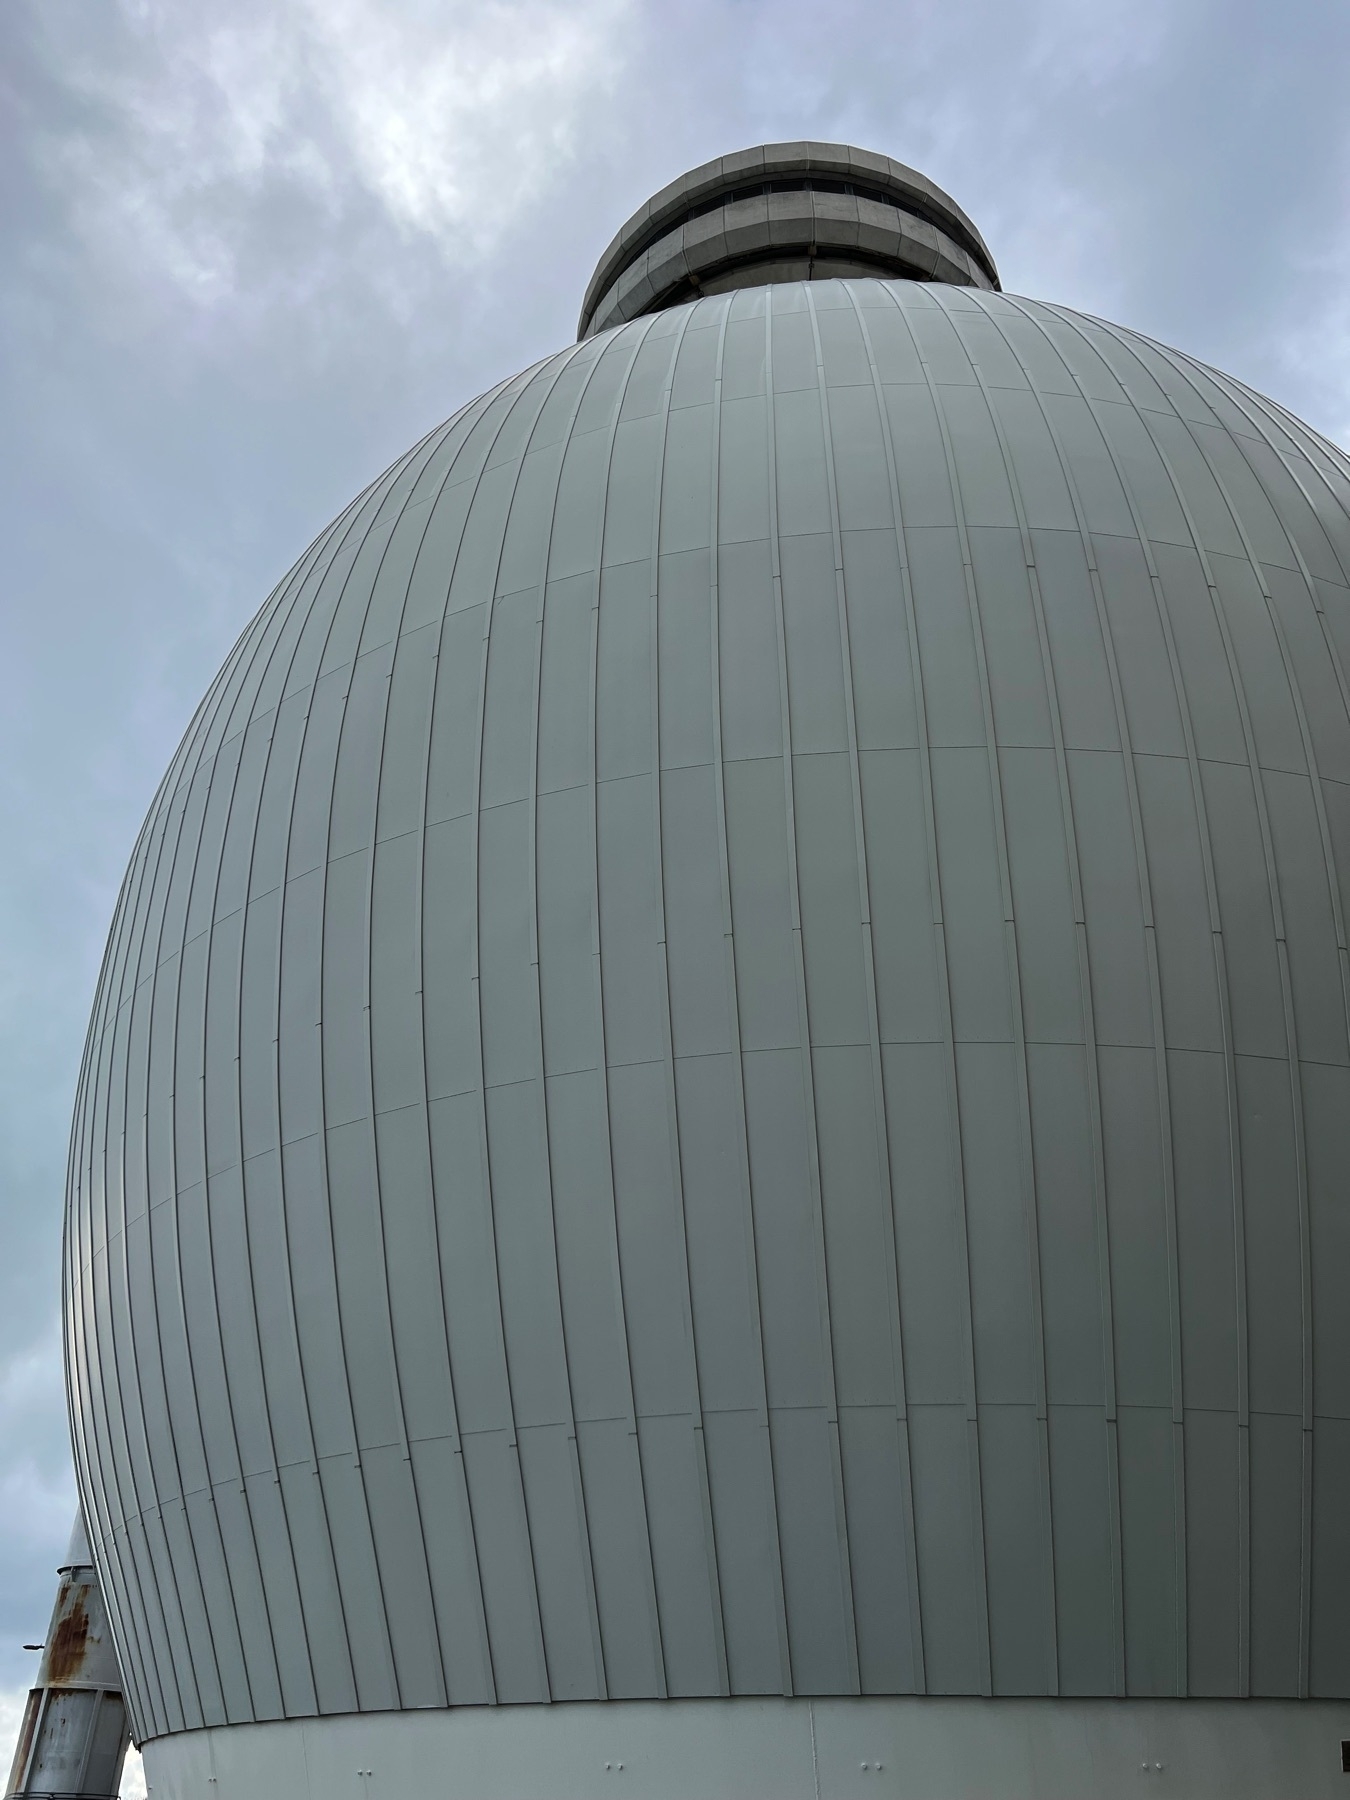 a huge, bulbous structure with ribbed metallic exterior